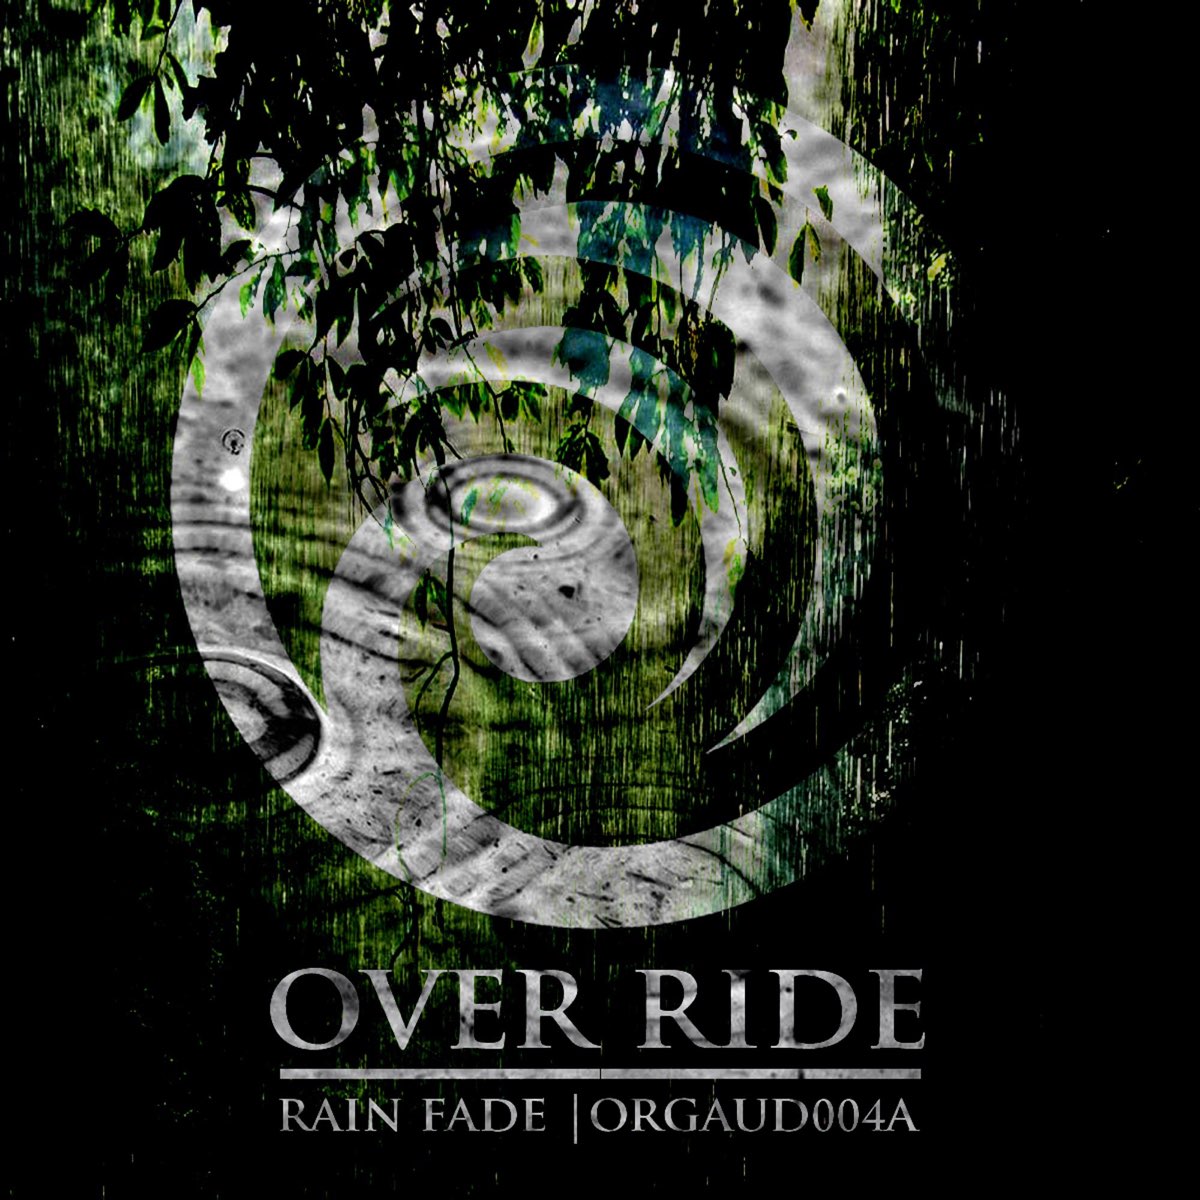 Over ride